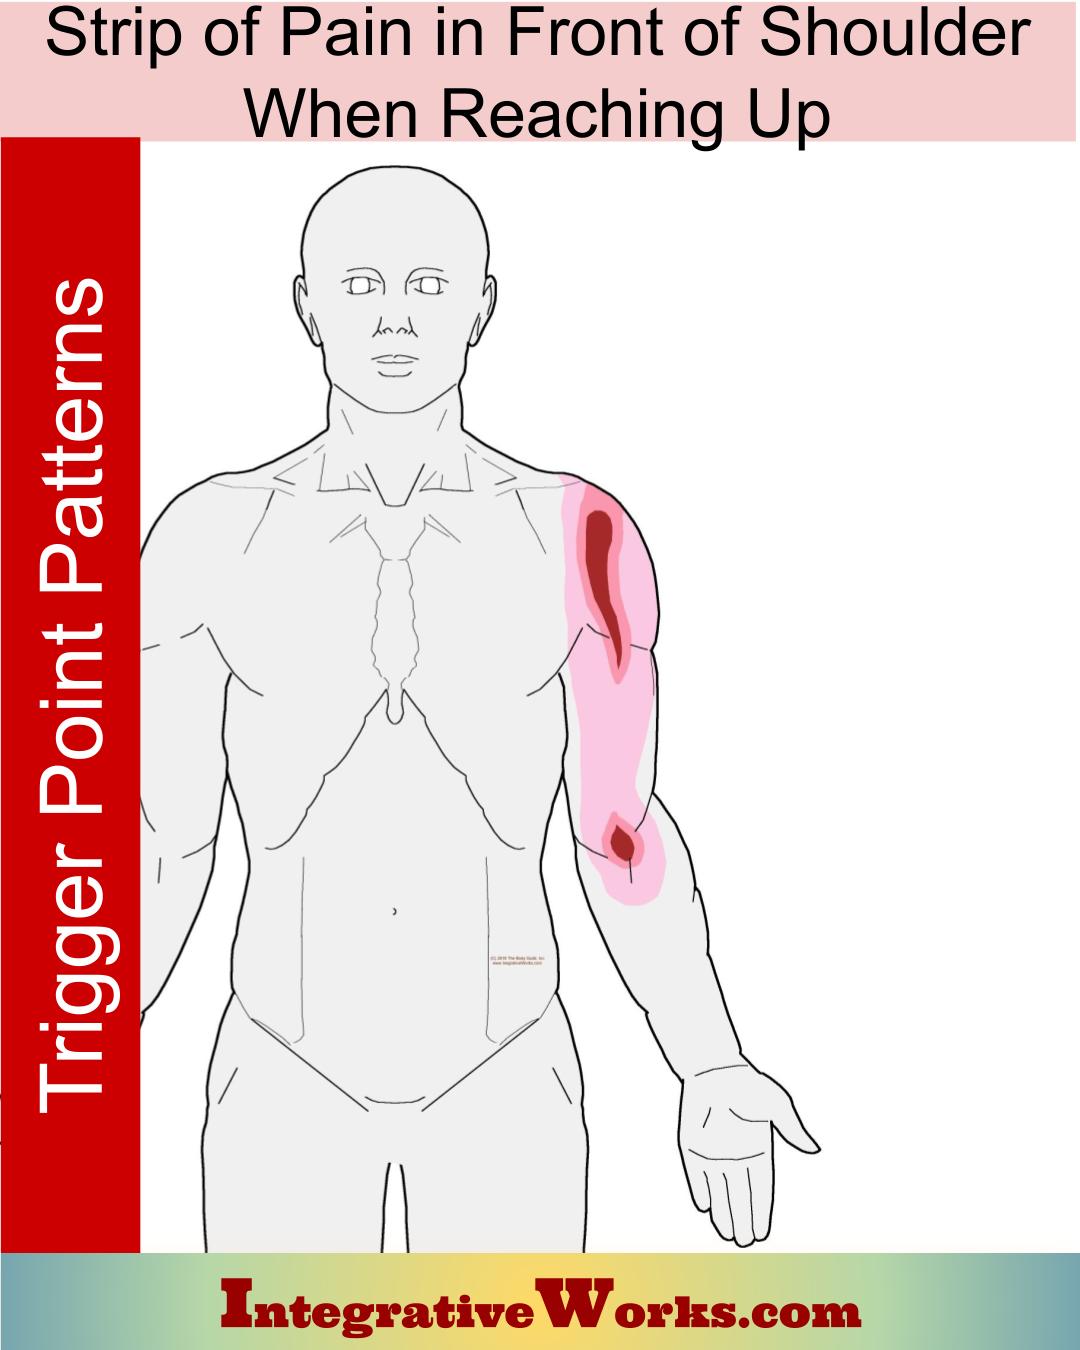 Superficial strip of shoulder pain when reaching up